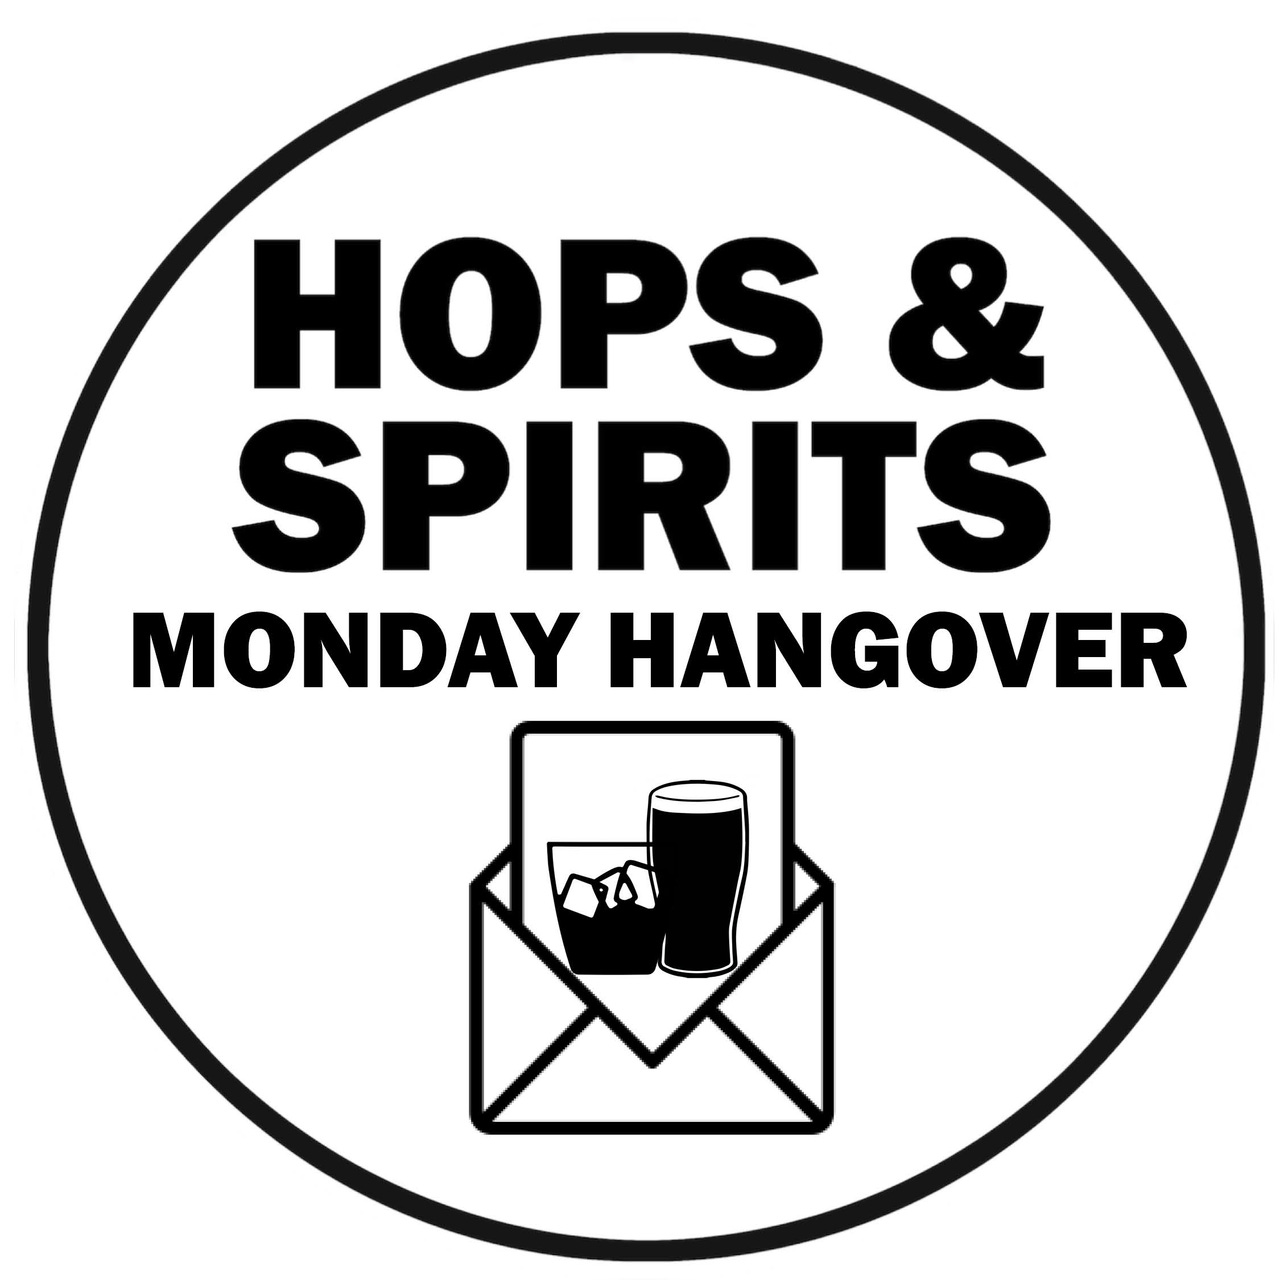 Monday Hangover by Hops & Spirits